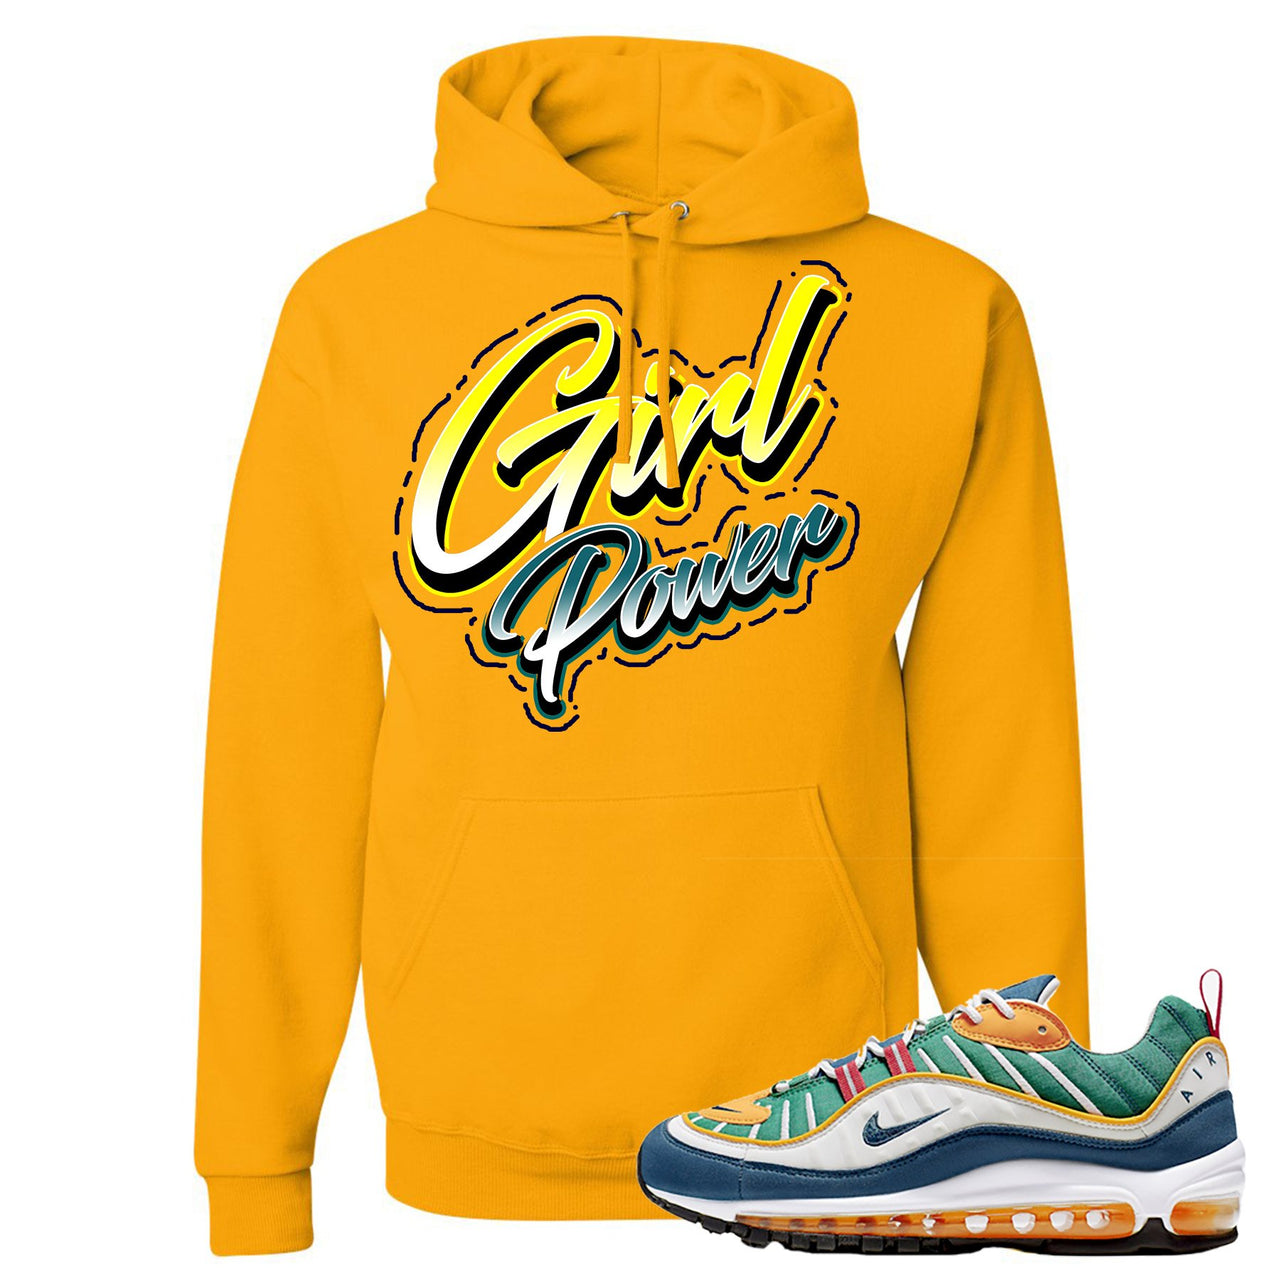 Multicolor 98s Hoodie | Girl Power, Gold Yellow